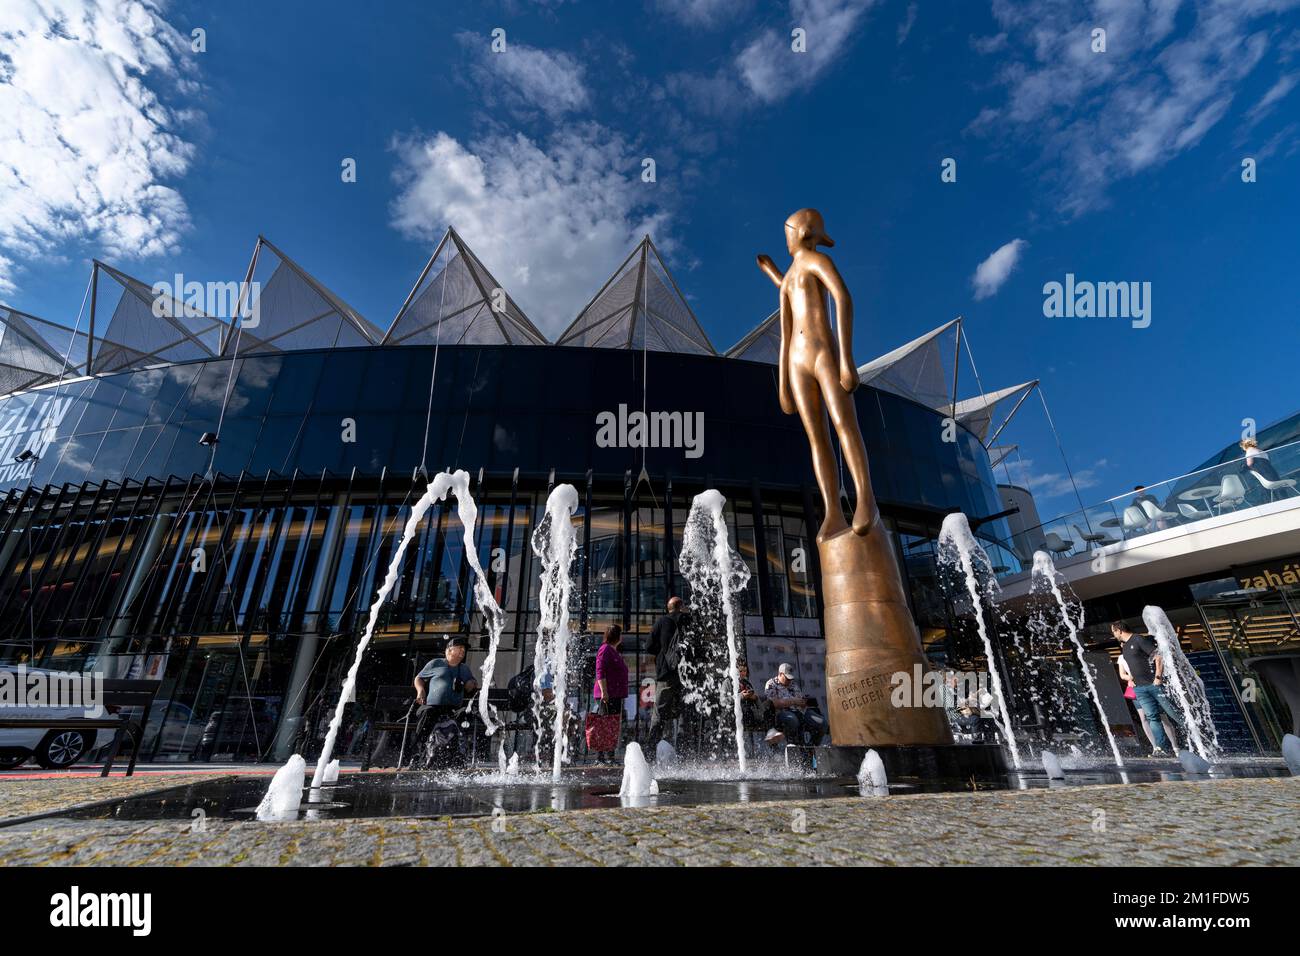 statue of golden shoe in front of the congress centre in Zlin, the first day of film festival for chidlren  (CTK Photo/Ondrej Zaruba) Stock Photo